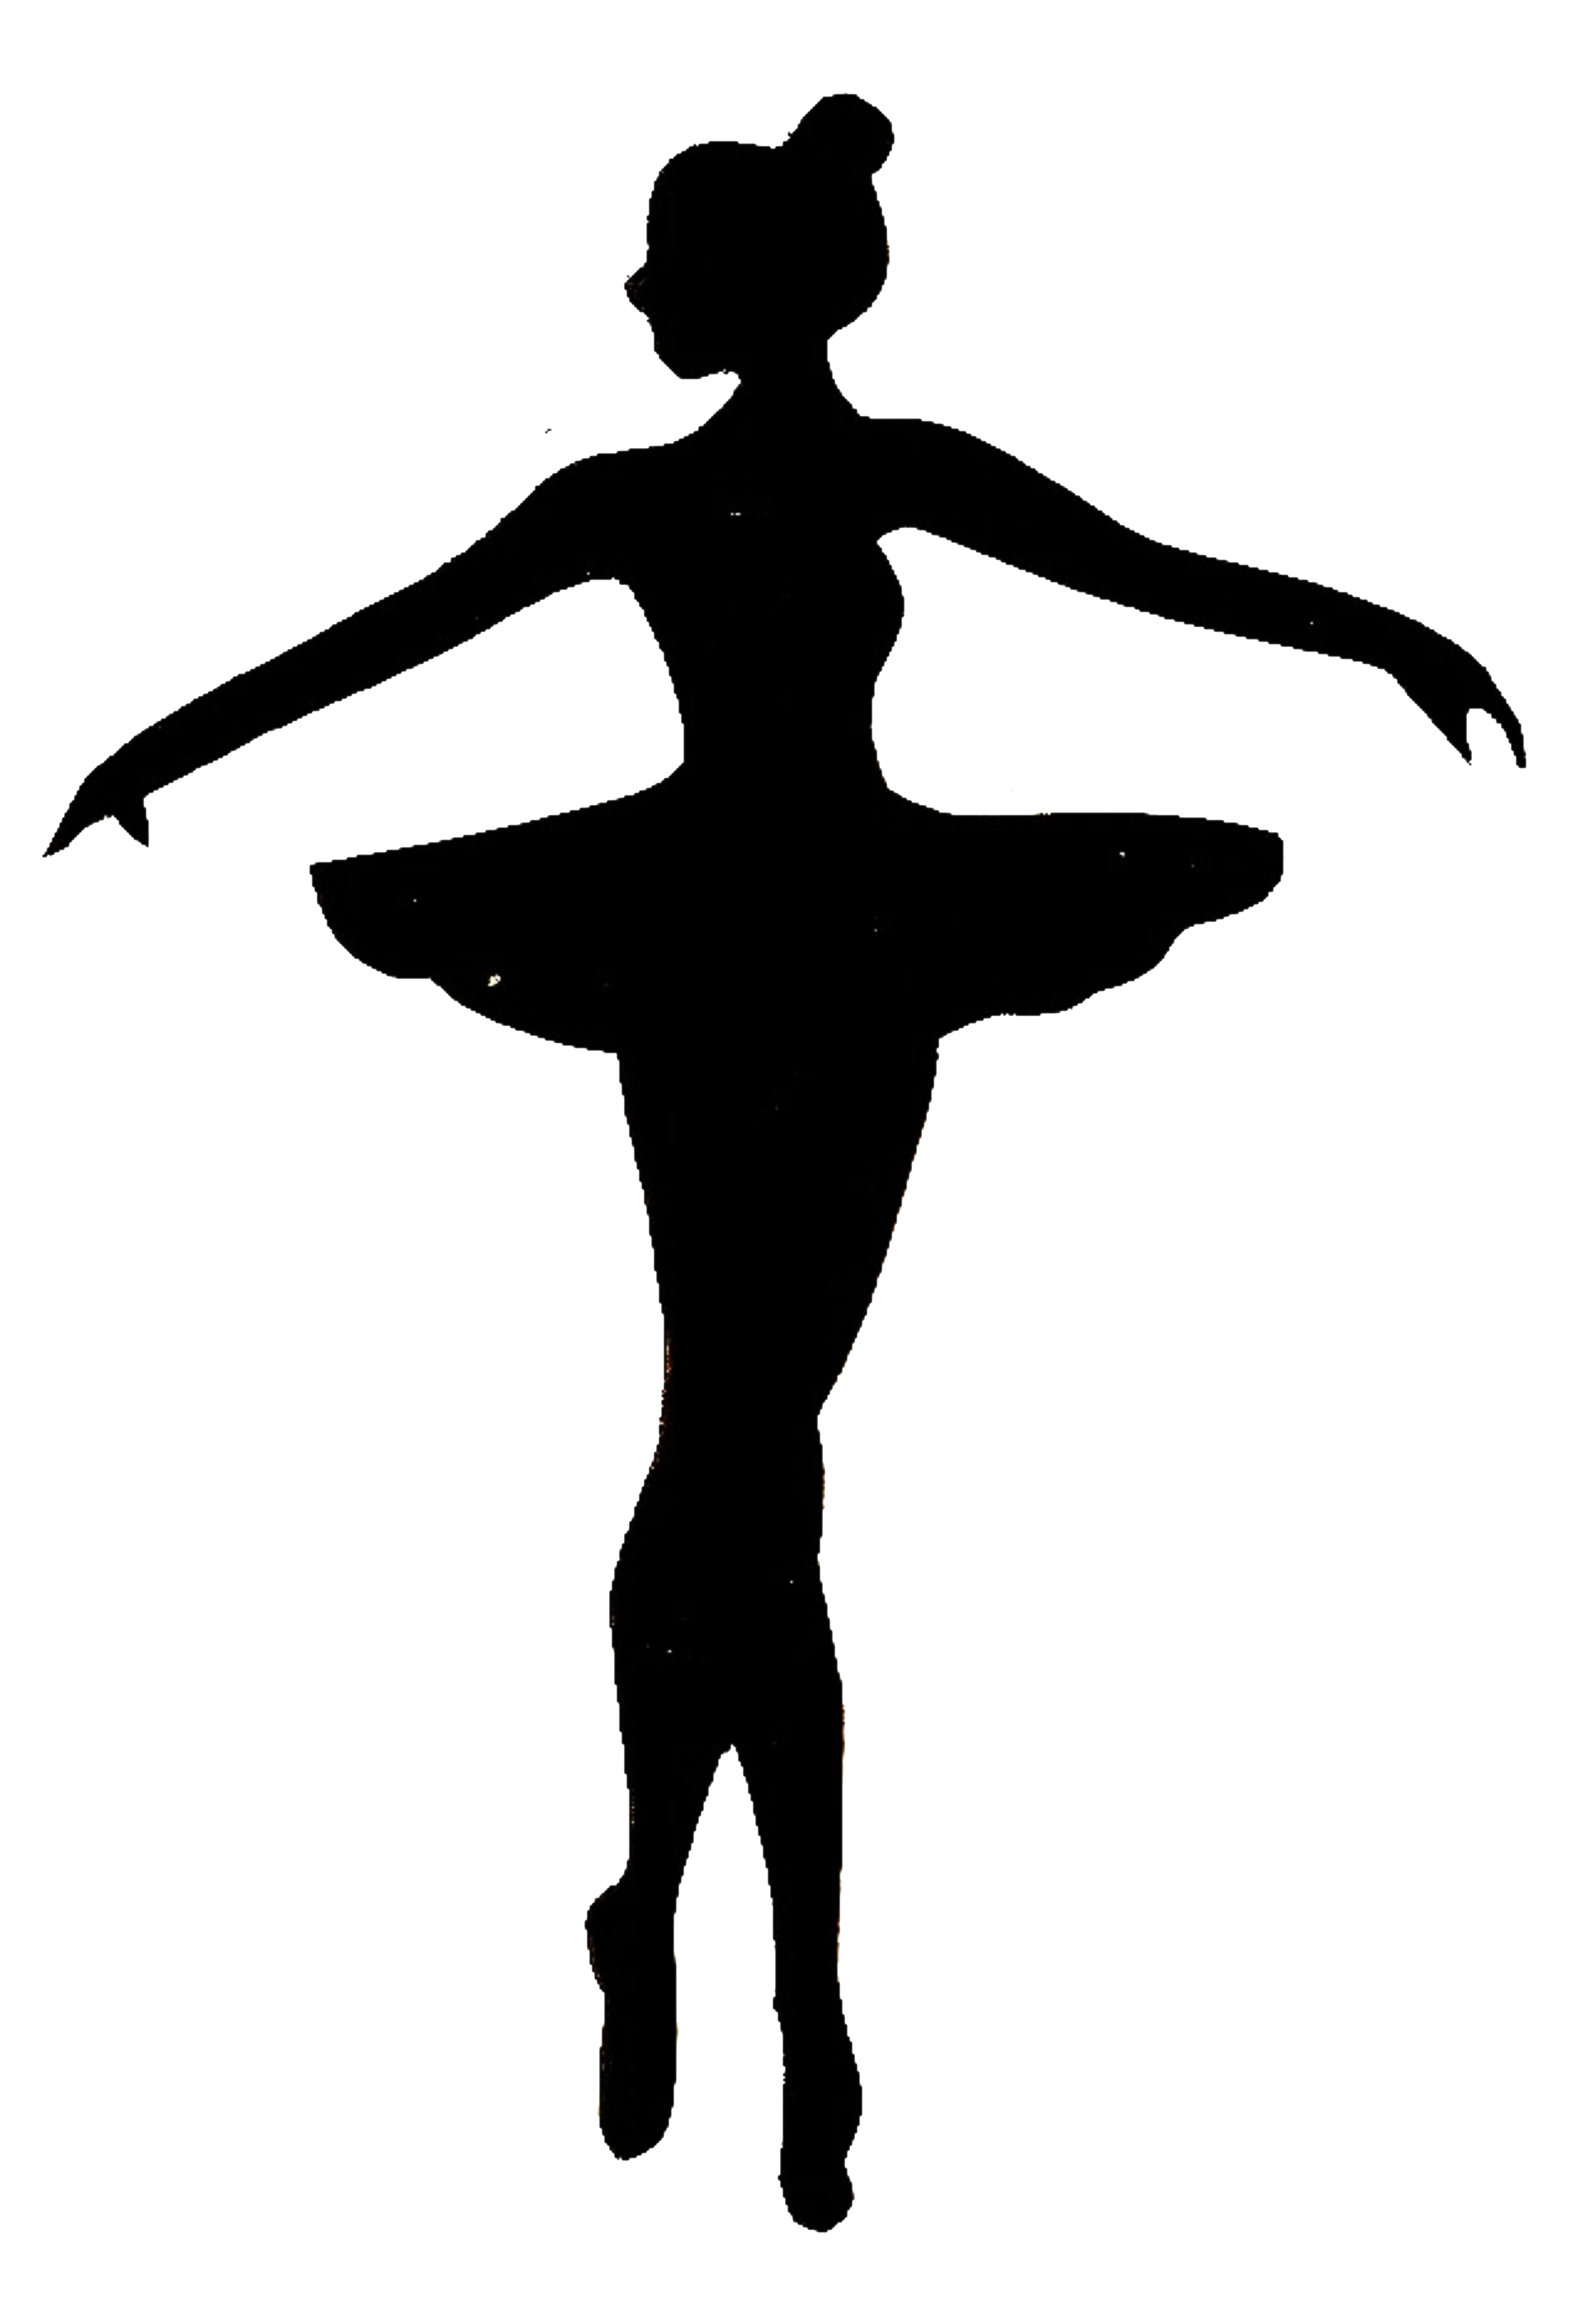 Ballet PNG Image Vector, Clipart, PSD.